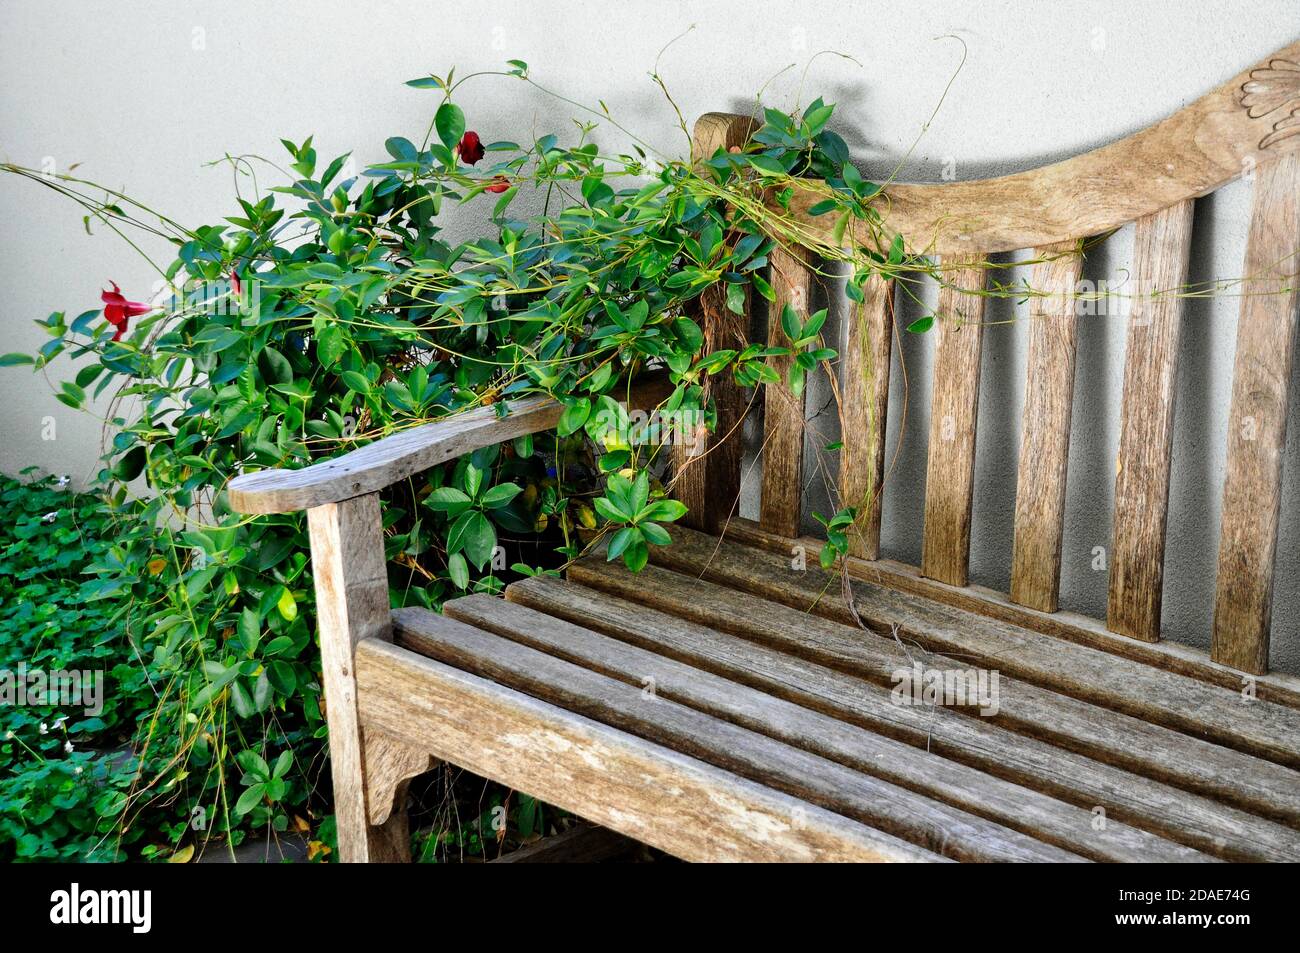 Restful scene of a corner of a old wooden bench in an overgrown garden showing the seat,back and arm rest Stock Photo